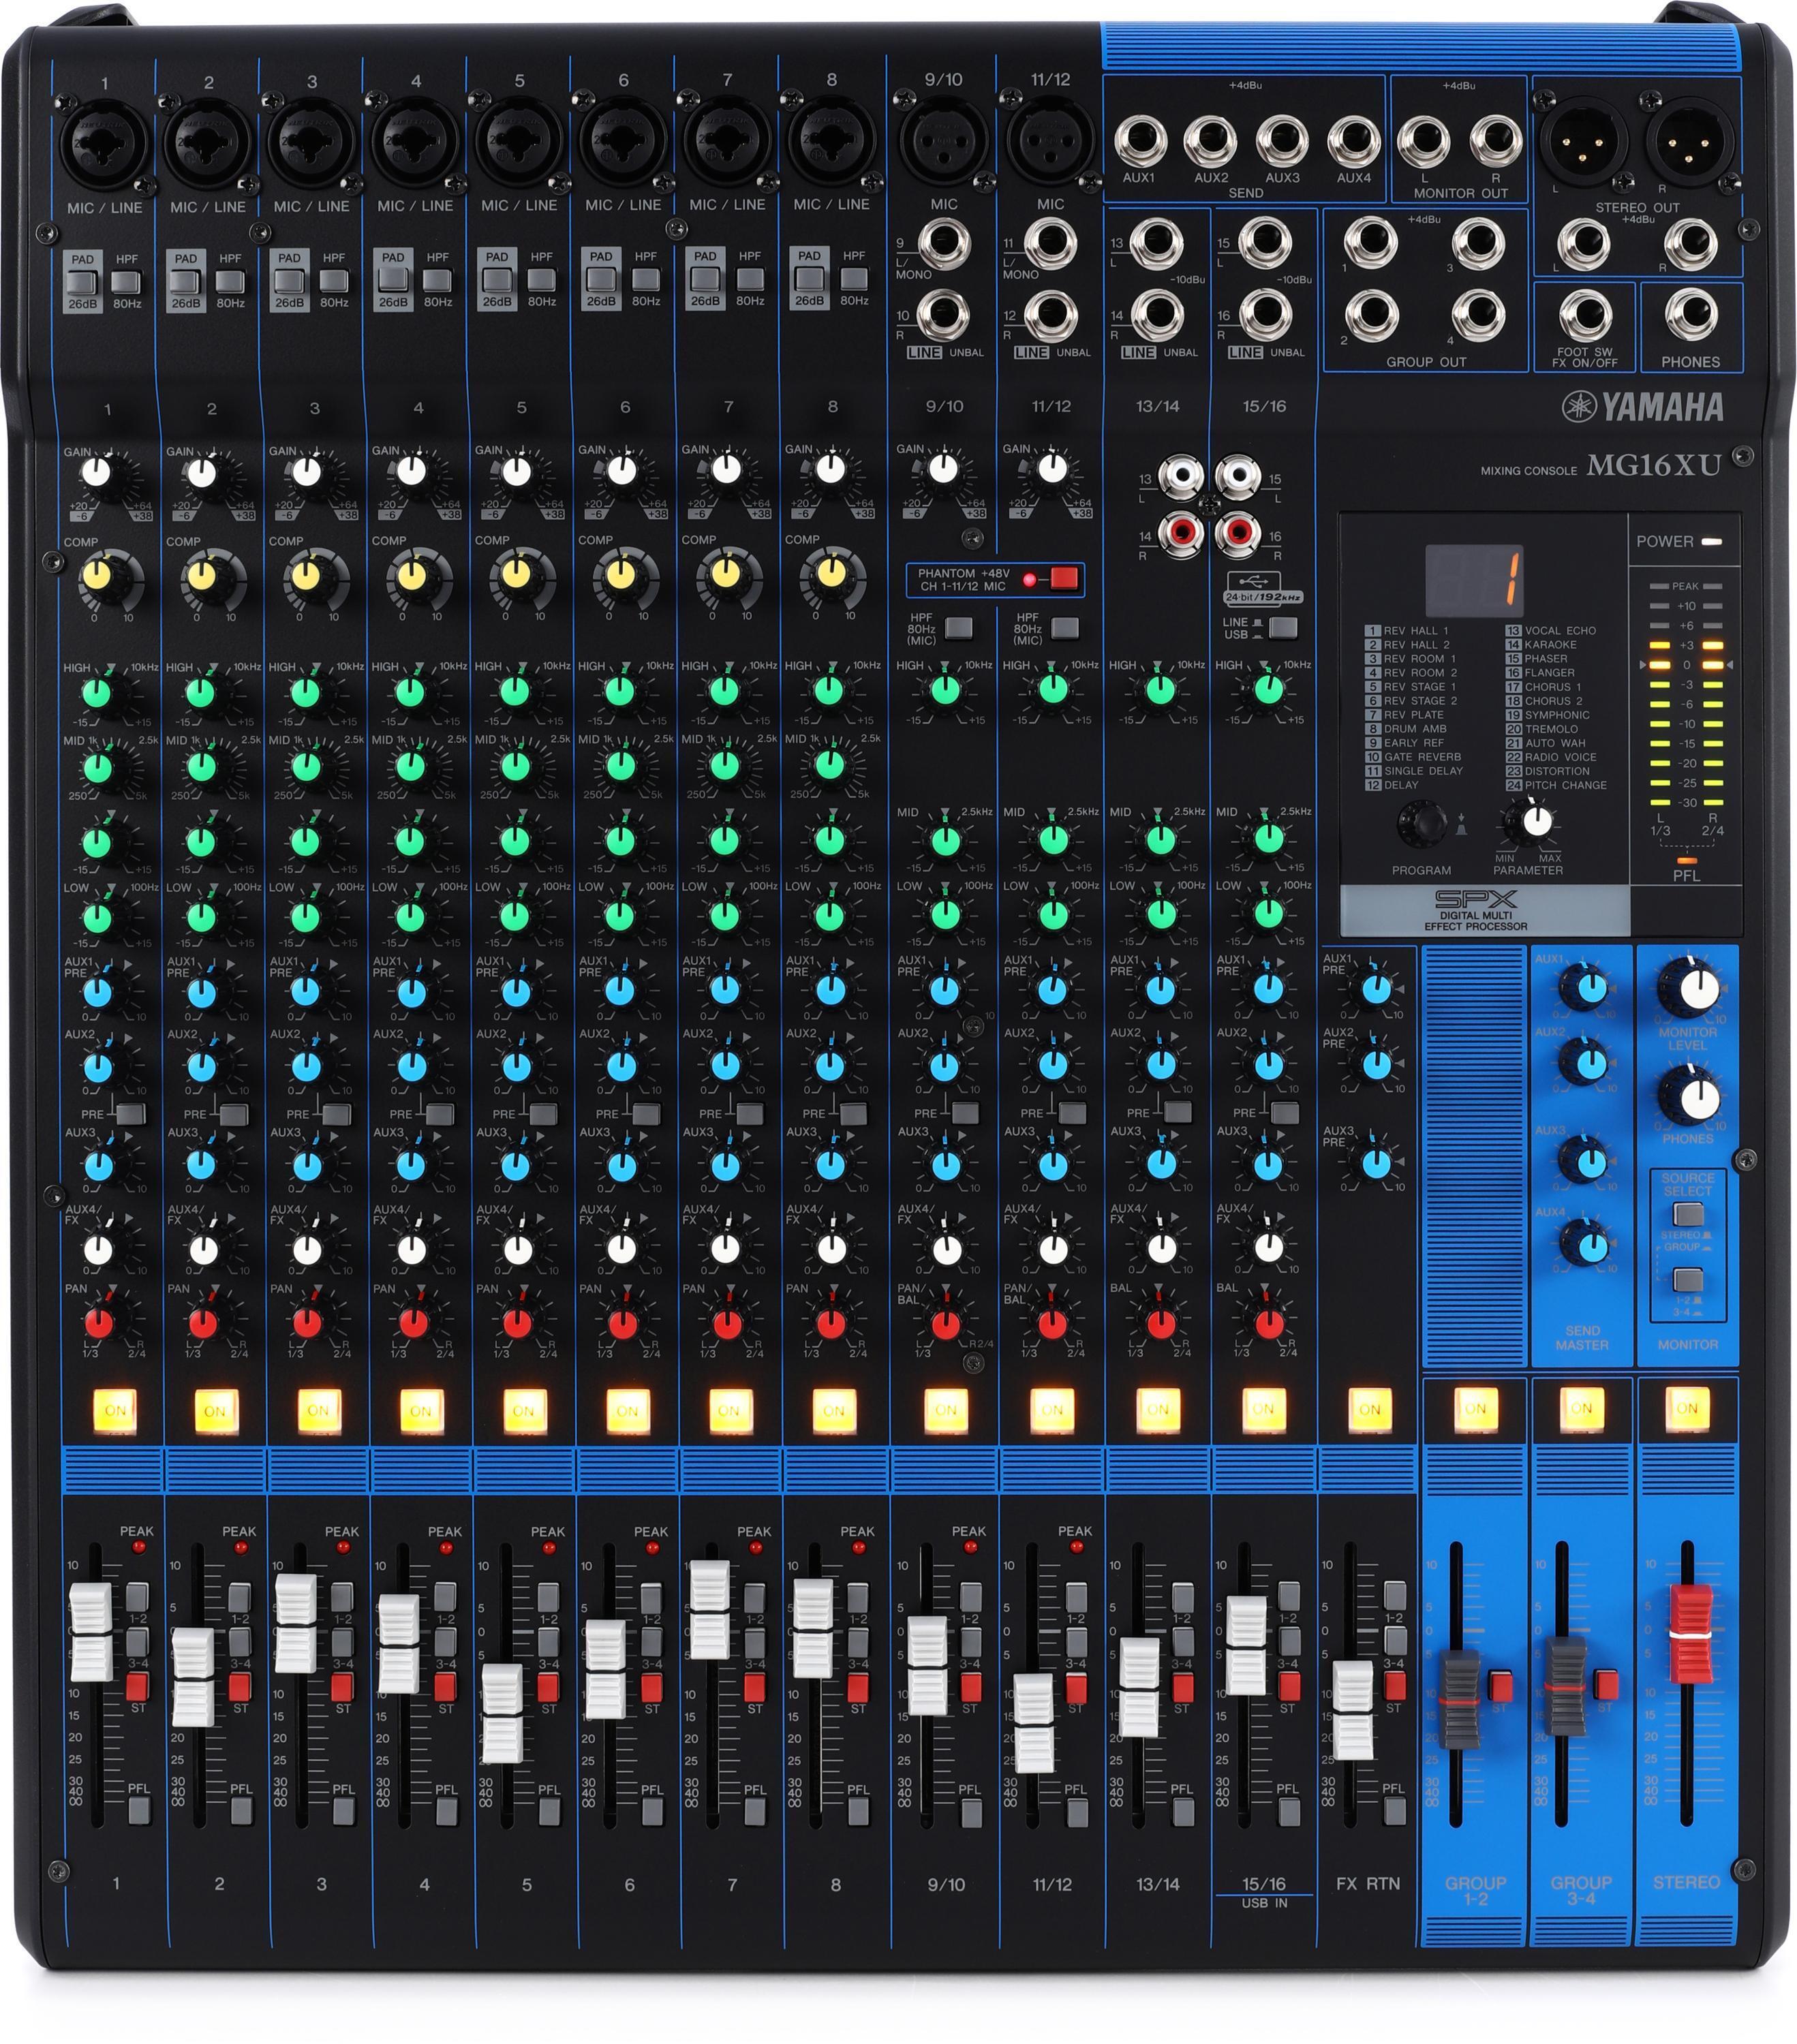 Bundled Item: Yamaha MG16XU 16-channel Mixer with USB and FX